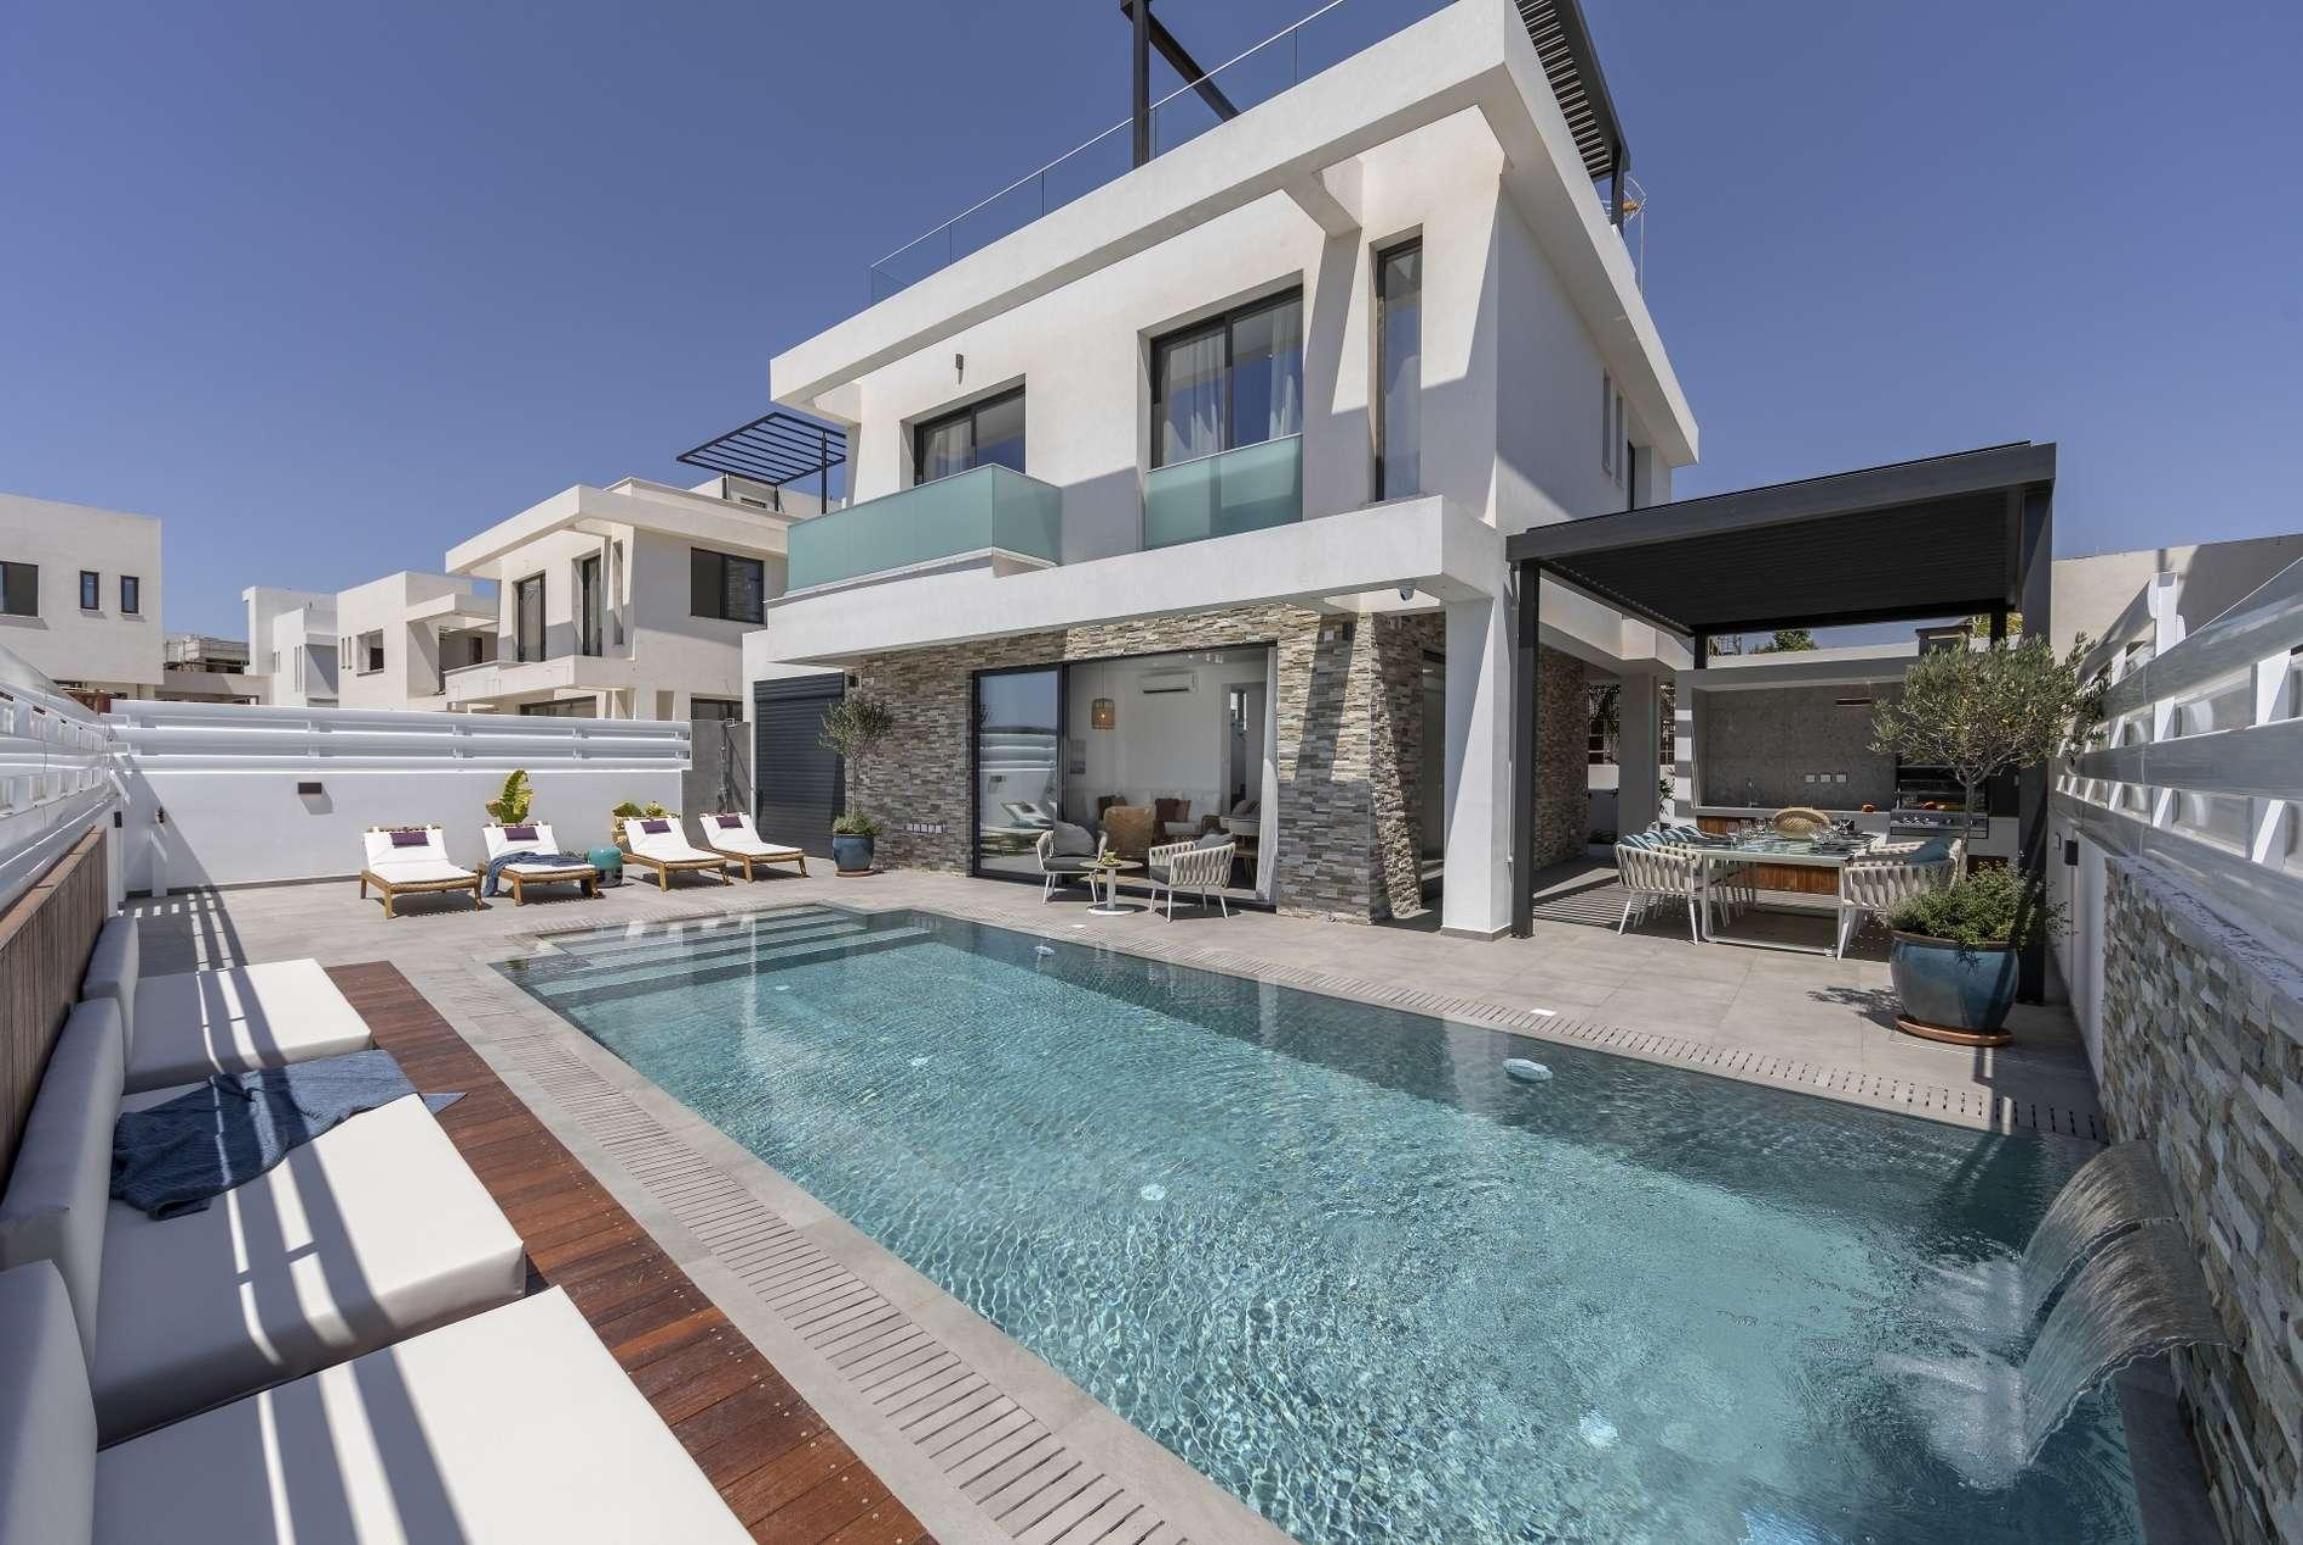 Property Image 1 - Modern, stylish 3 bed villa perfect for families